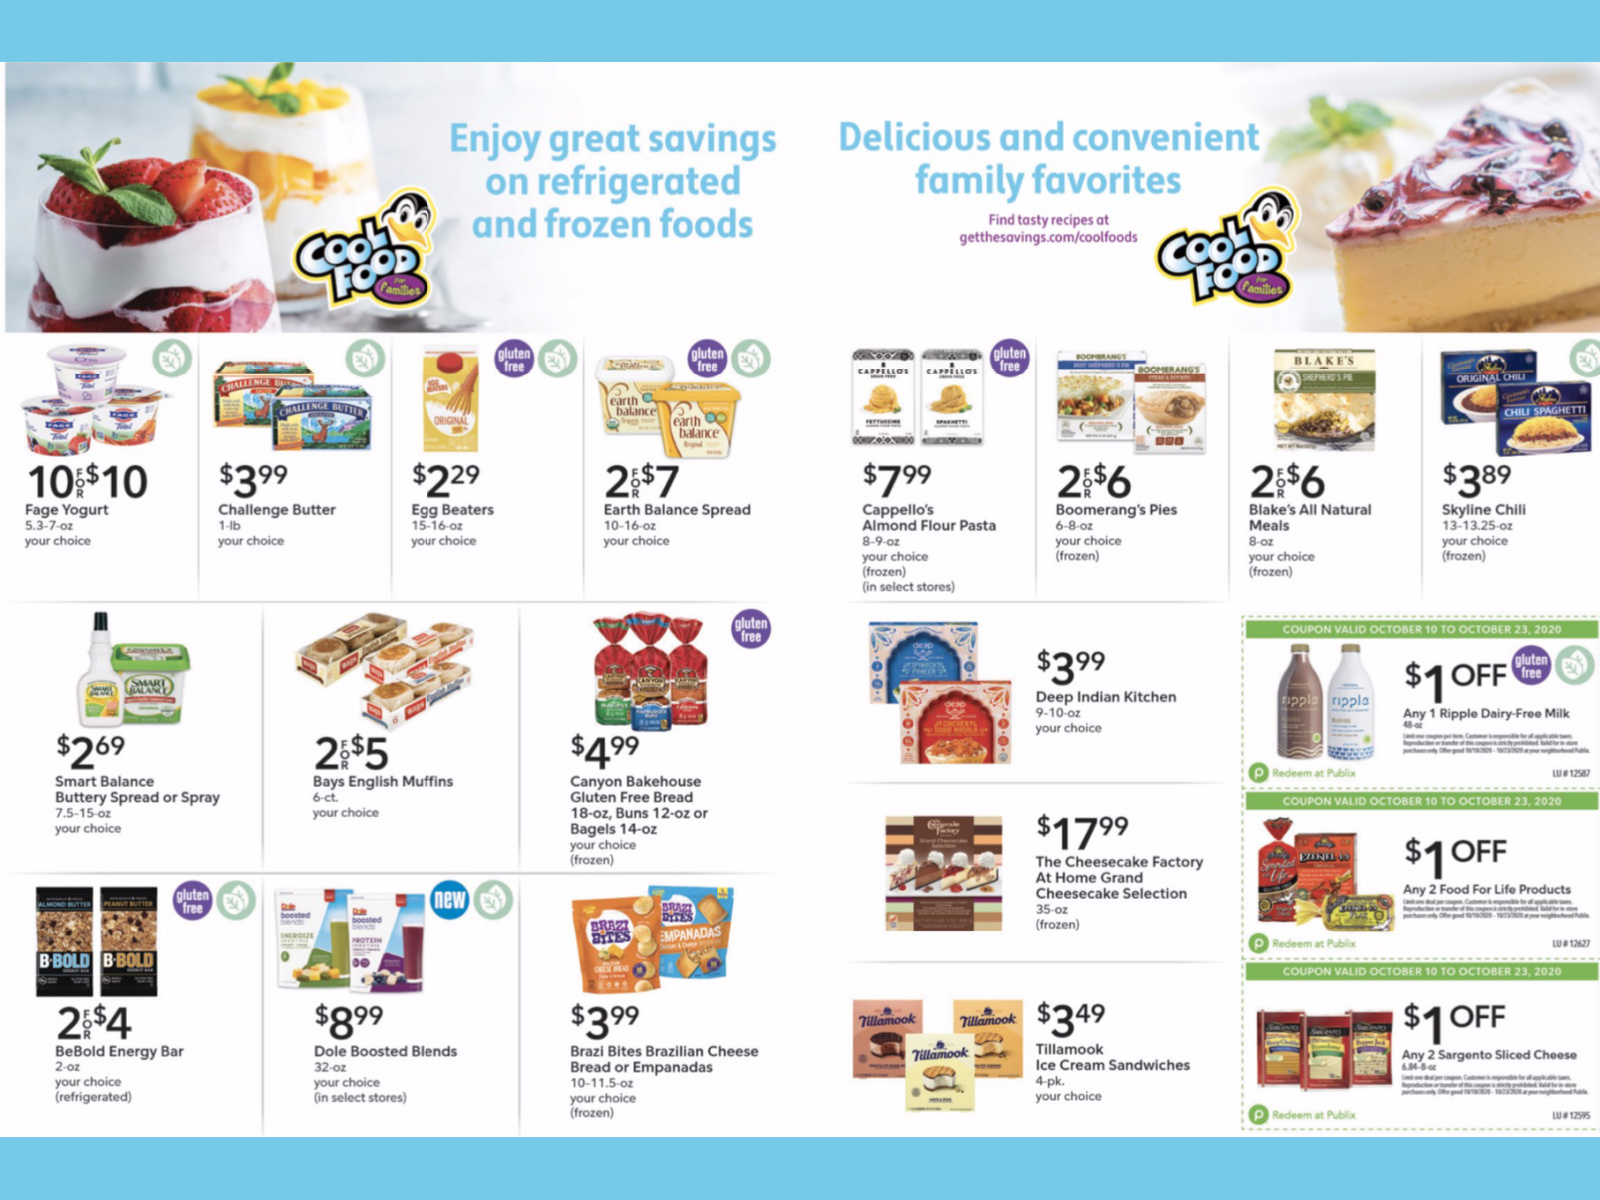 The Cool Foods For Families Promo Is Back – Great Deals On Delicious Refrigerated & Frozen Foods At Publix!